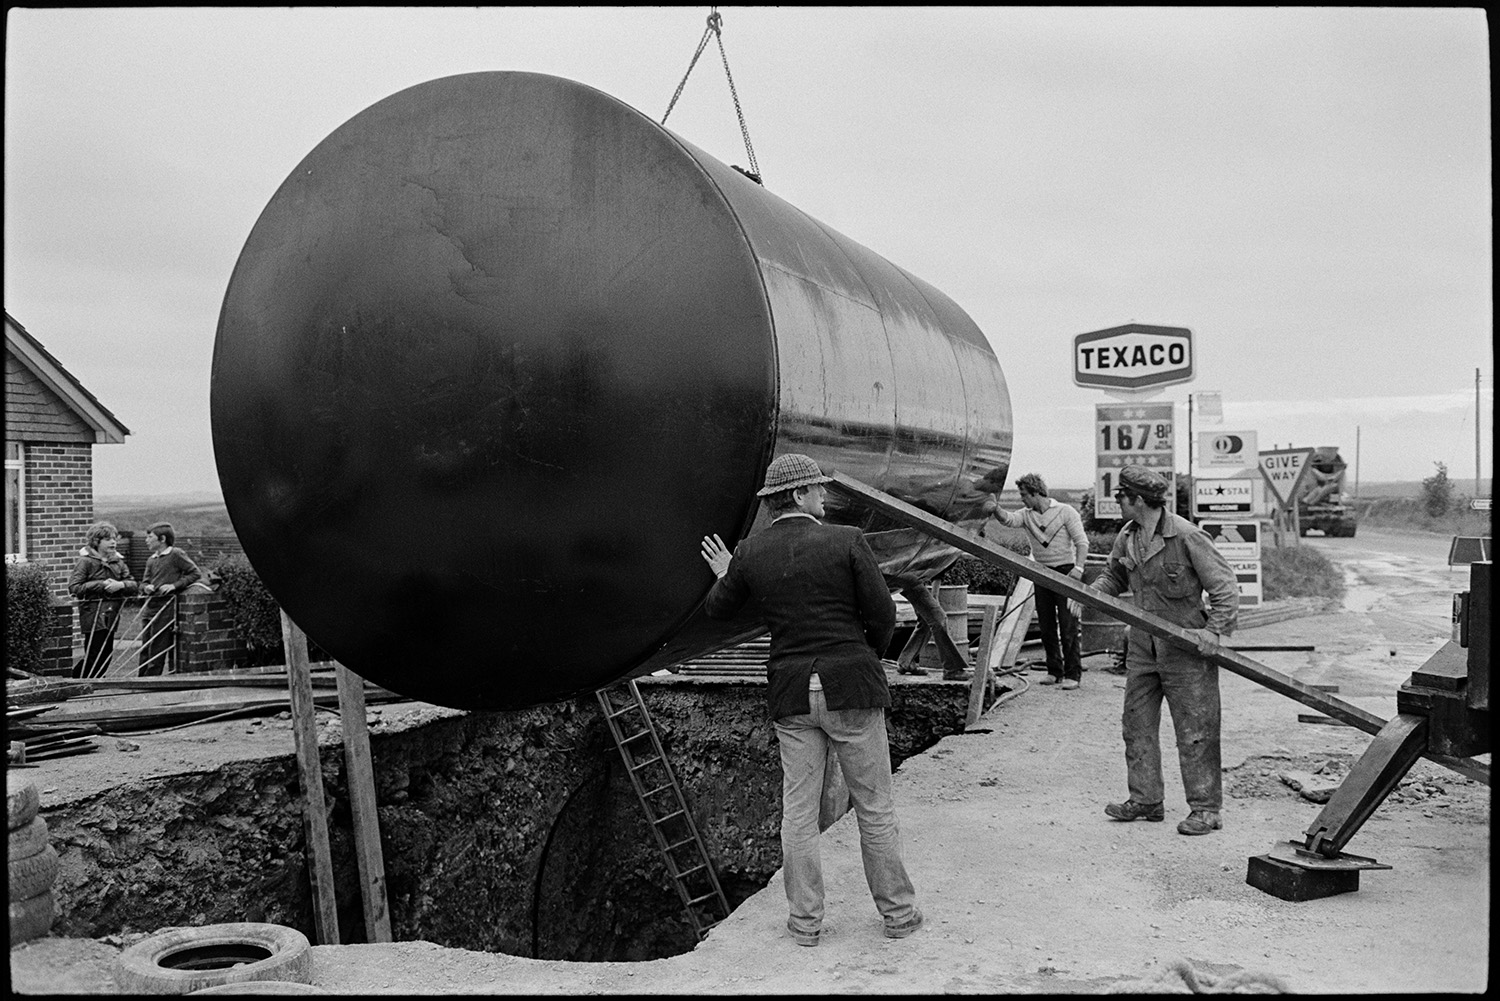 Men with crane installing huge underground petrol tank at garage.
[Four men supervising the lowering of a large petrol tank by crane into an excavated hole at Beacon Garage, Dolton Beacon. Two boys are watching from gate to an adjoining building, and a Texaco petrol sign is visible in the background.]